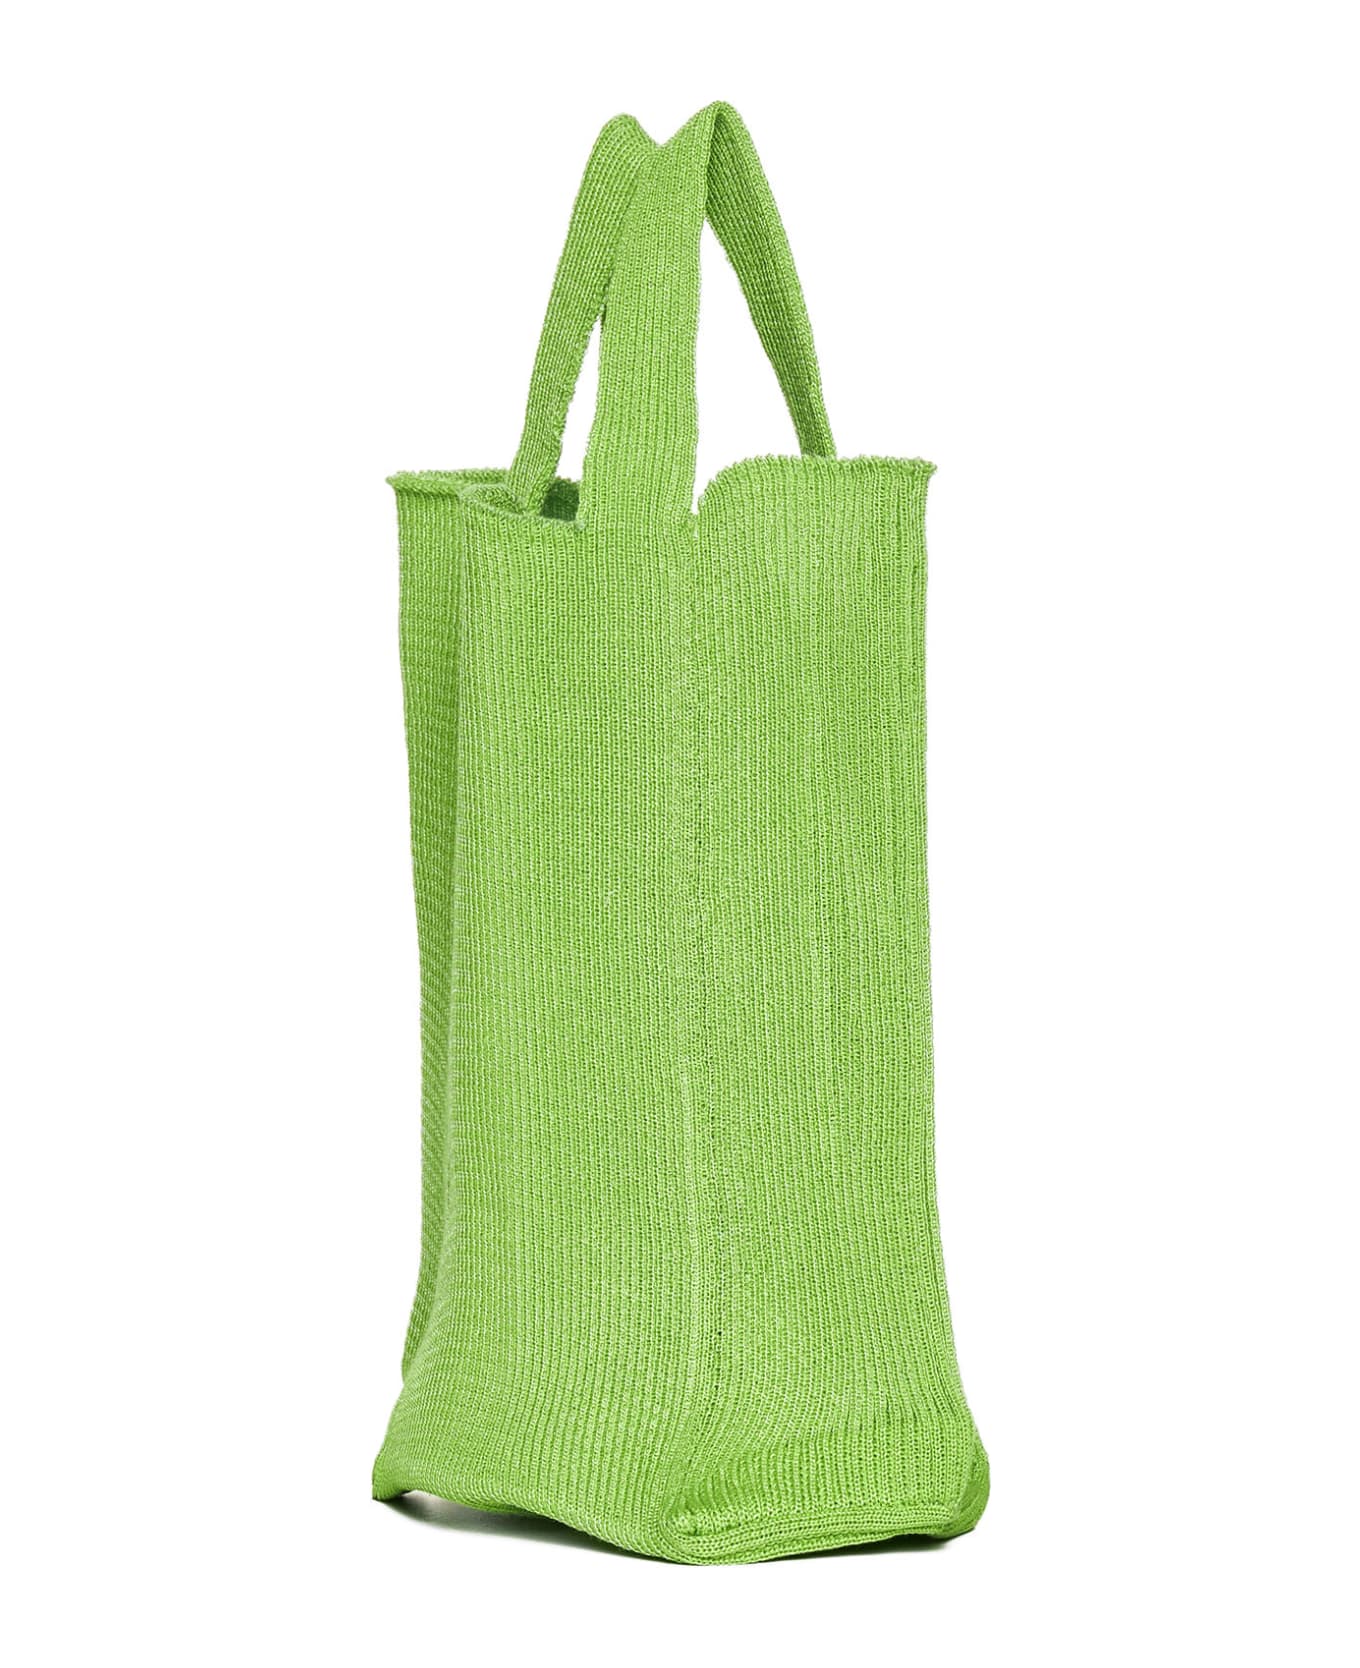 A. Roege Hove Tote - Apple green